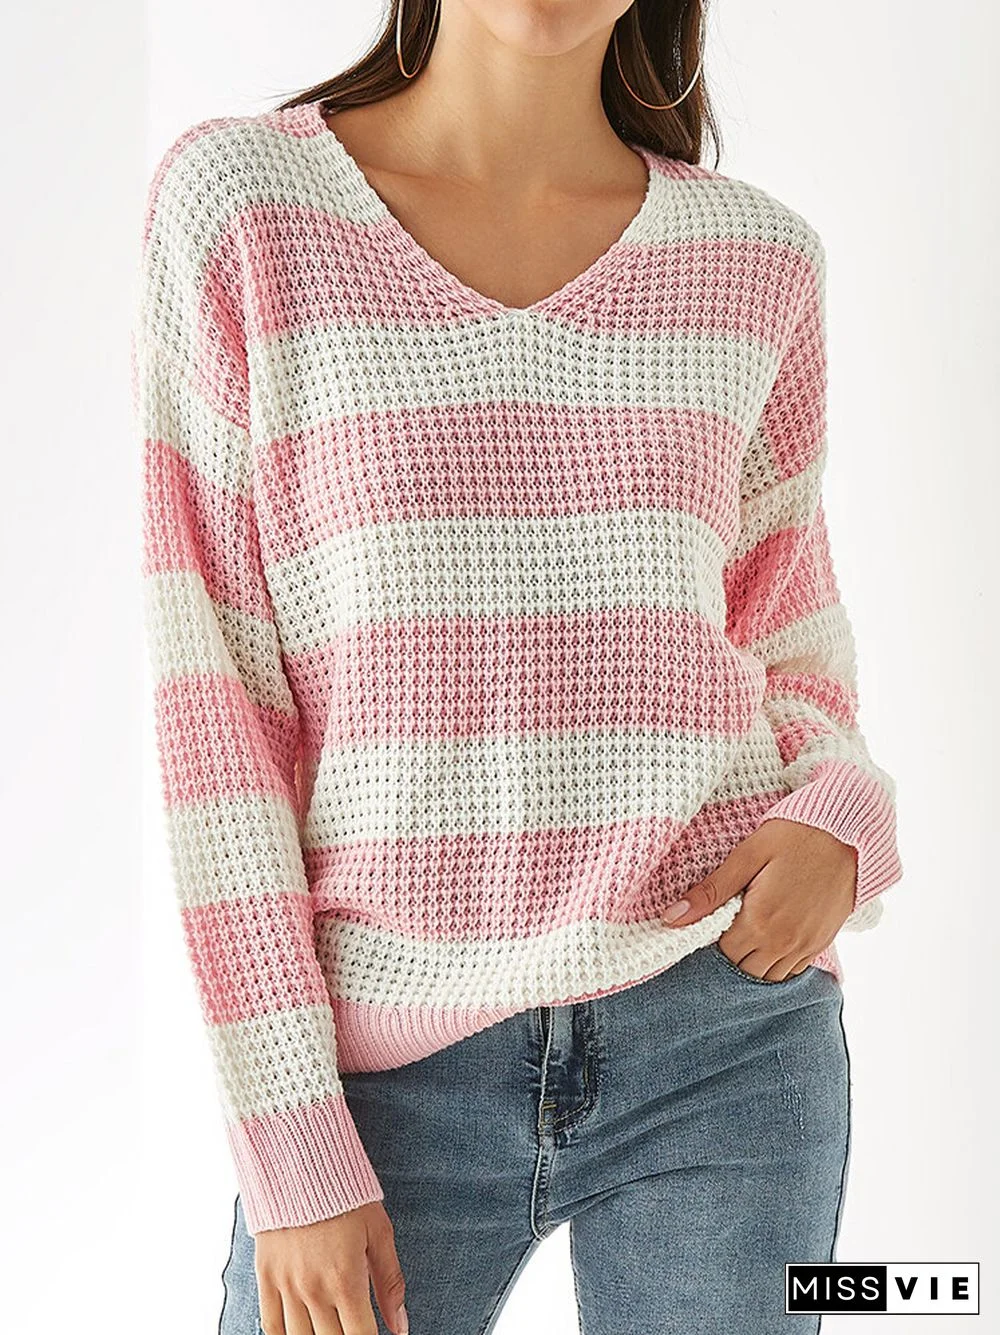 Contrast Color Striped Print Knitted Long Sleeve Casual Sweater for Women